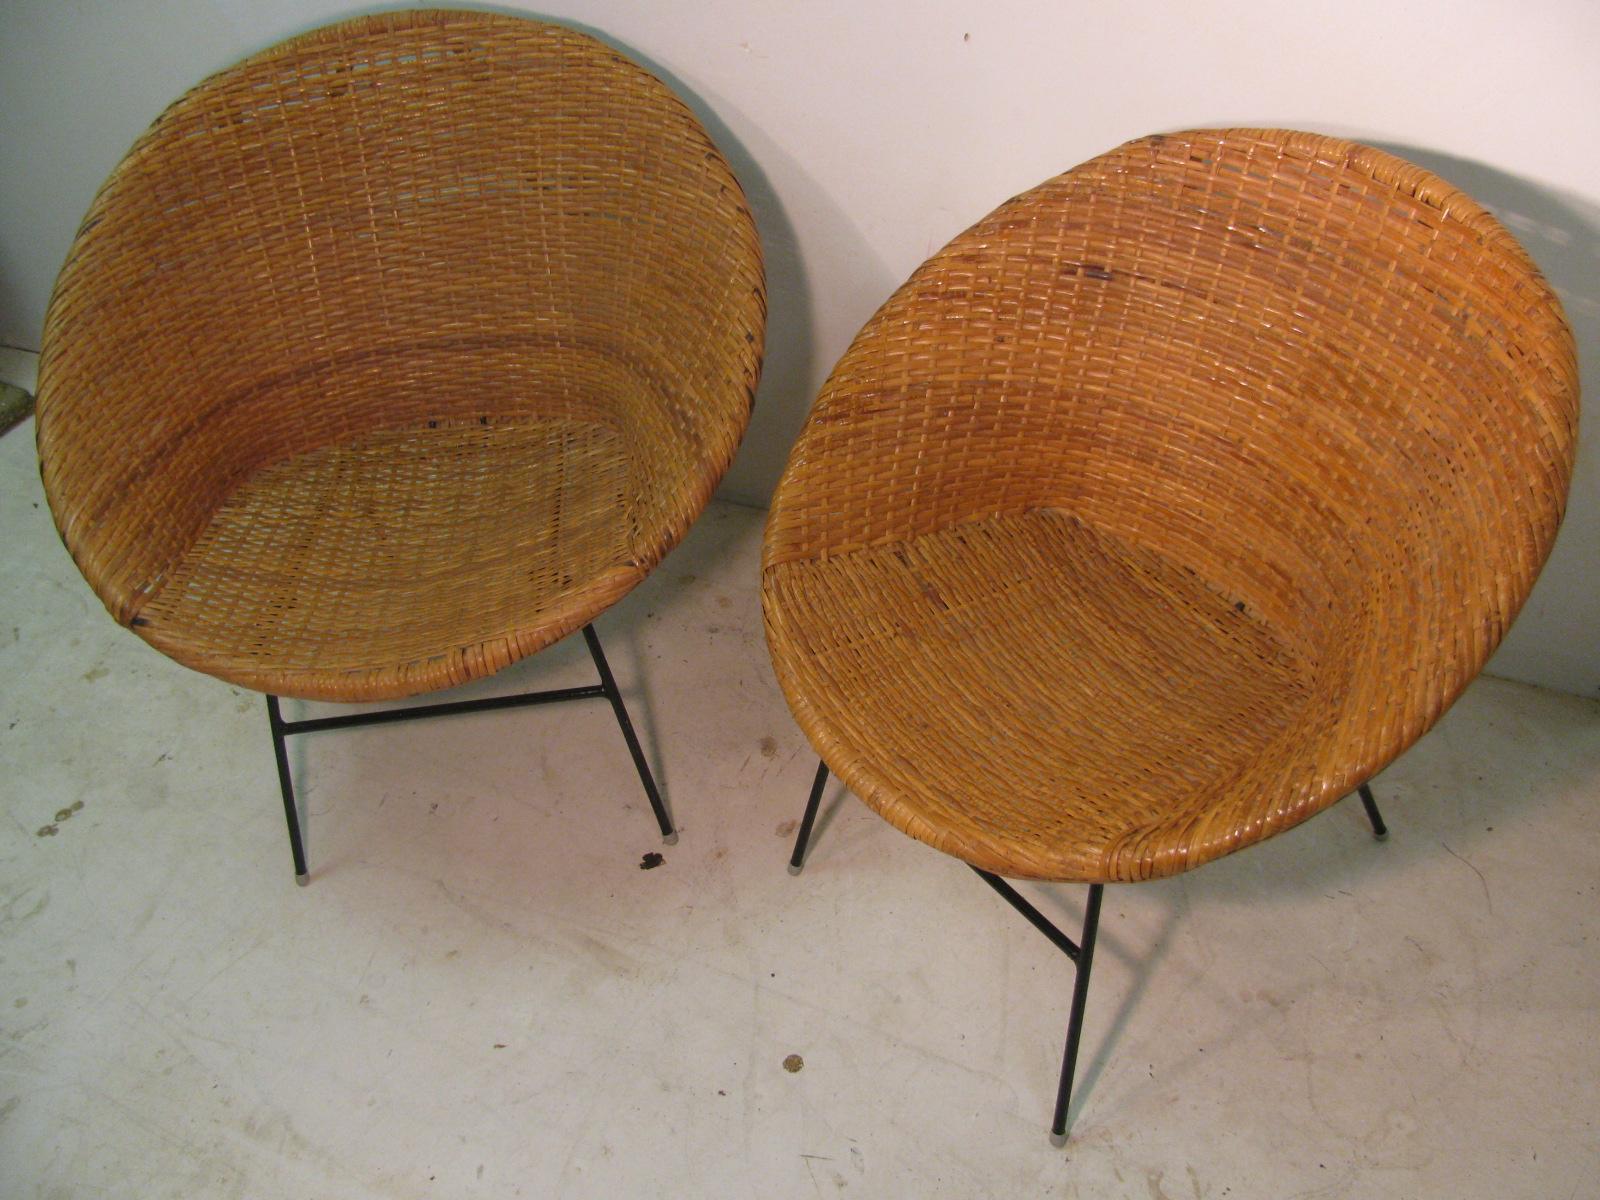 Painted Pair of Mid-Century Modern Iron and Rattan Hoop Lounge Chairs